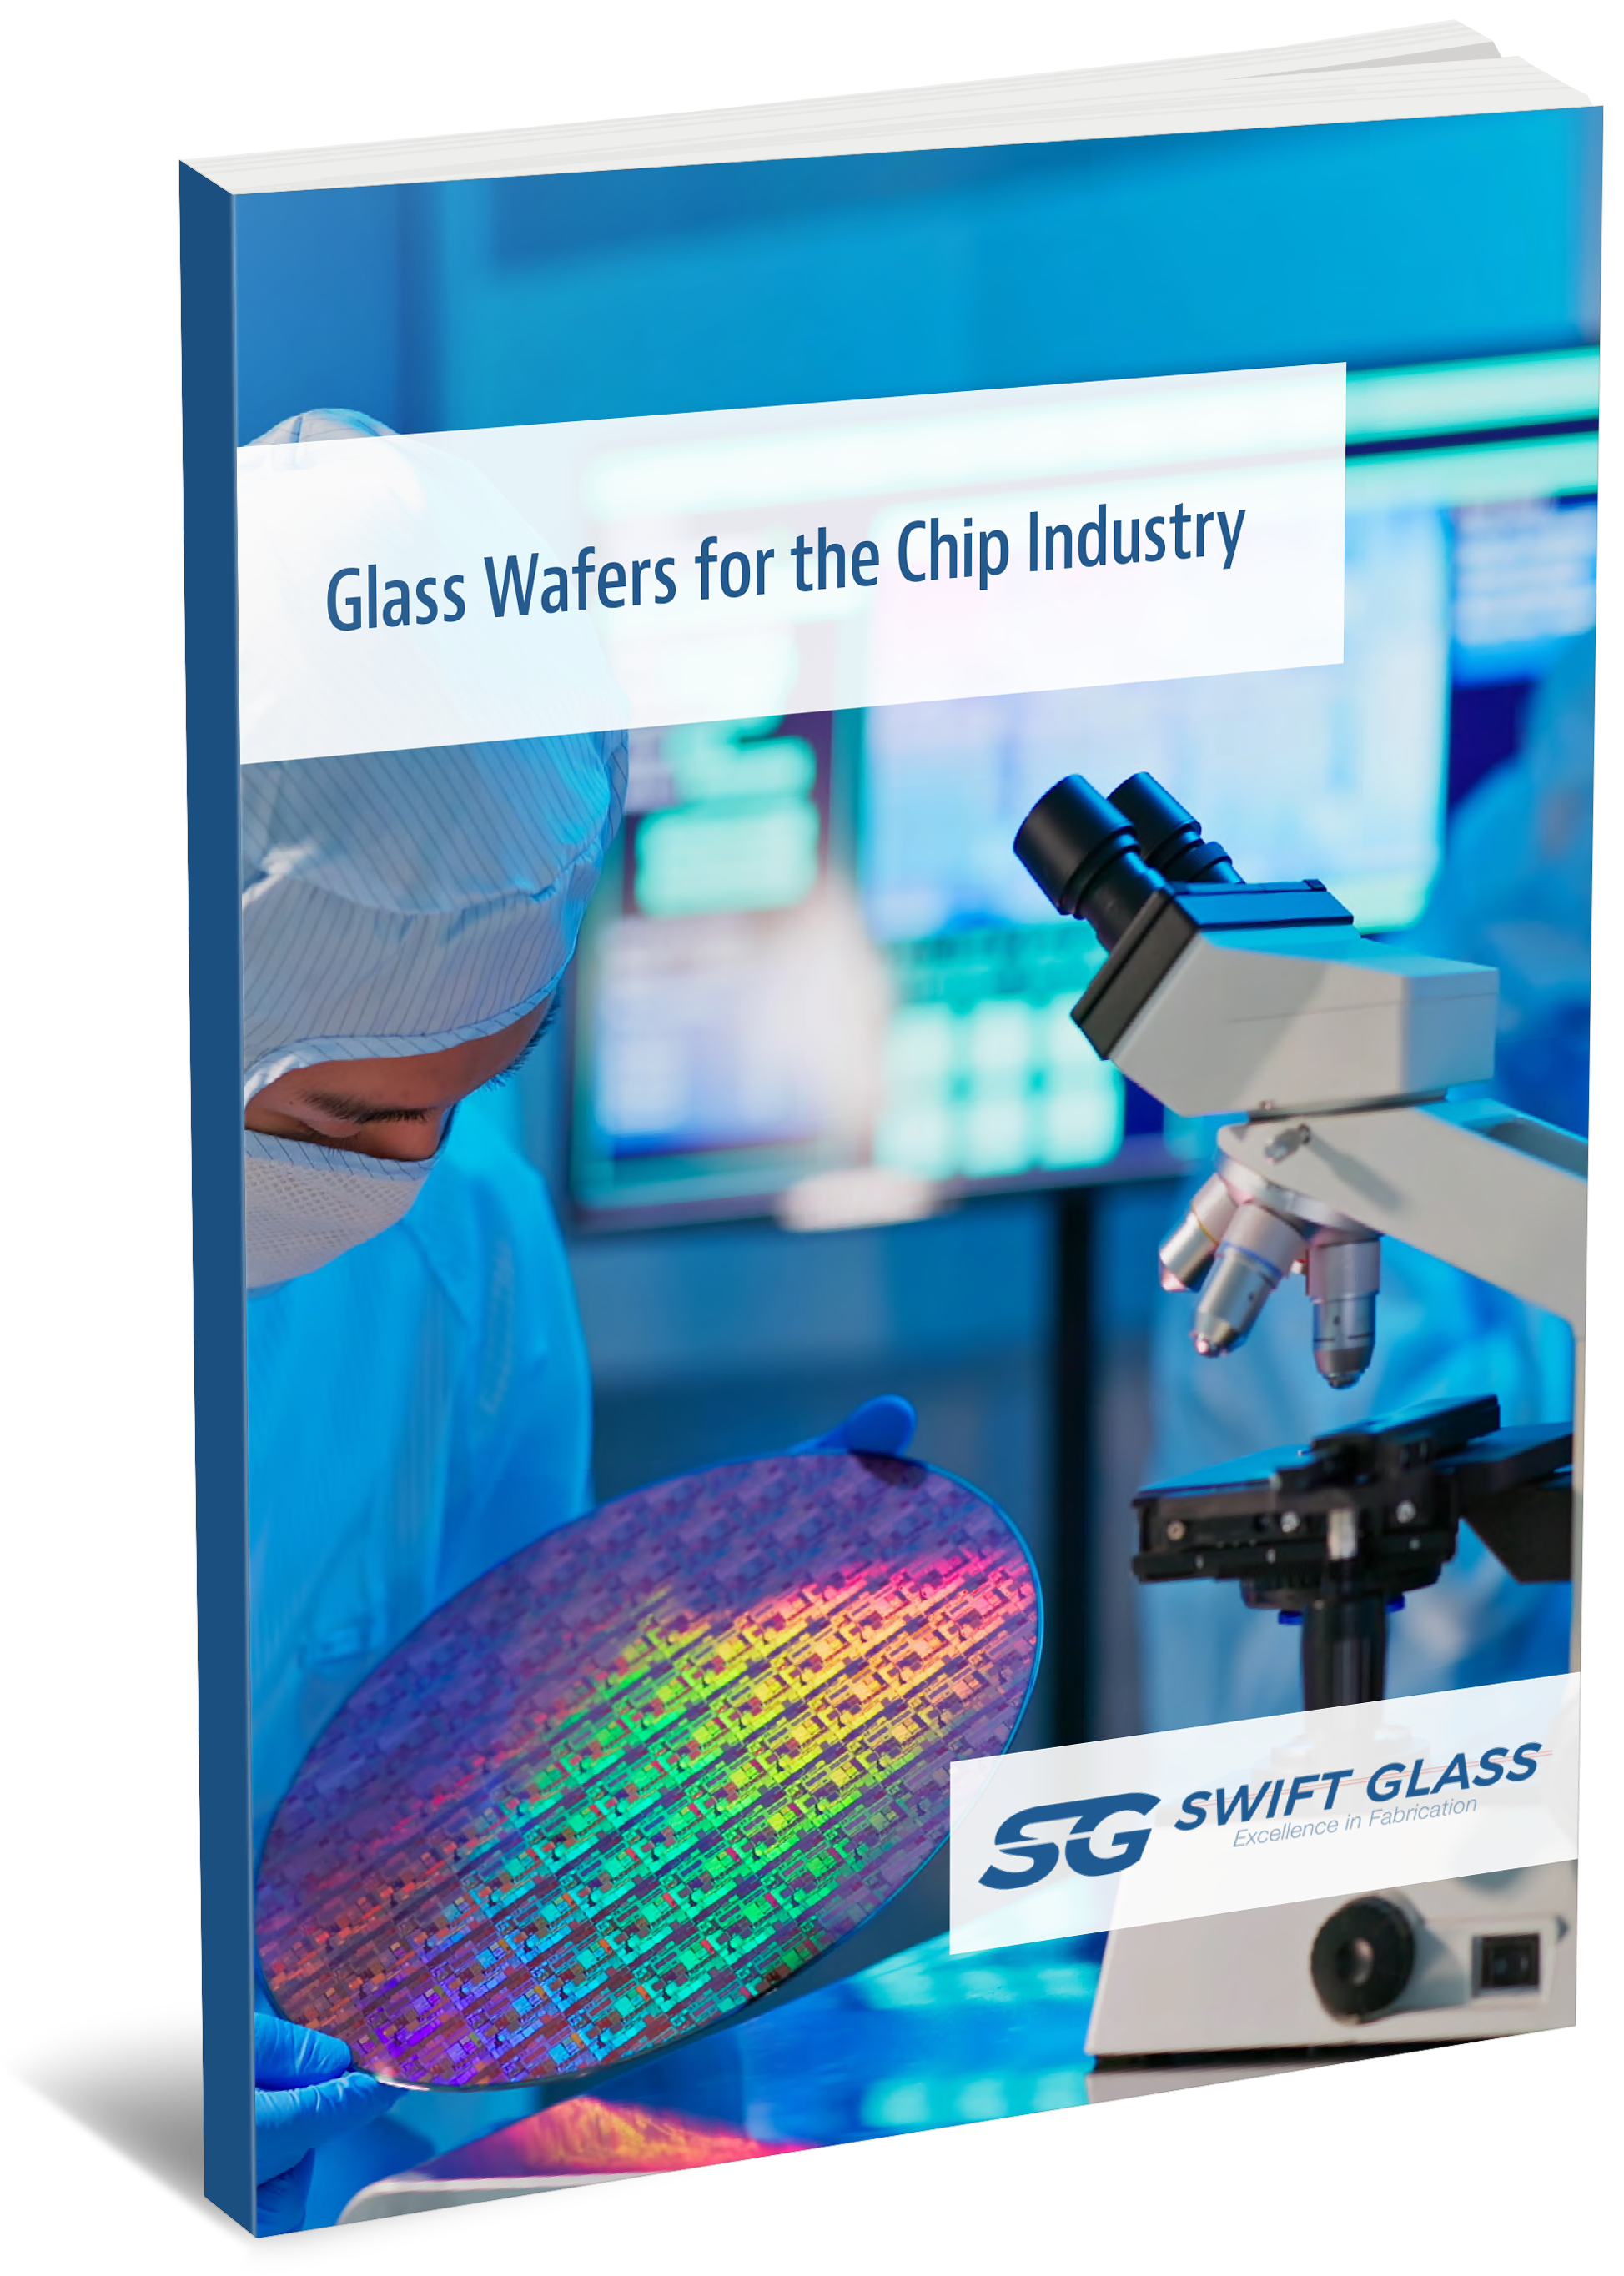 Glass Wafers for the Chip Industry